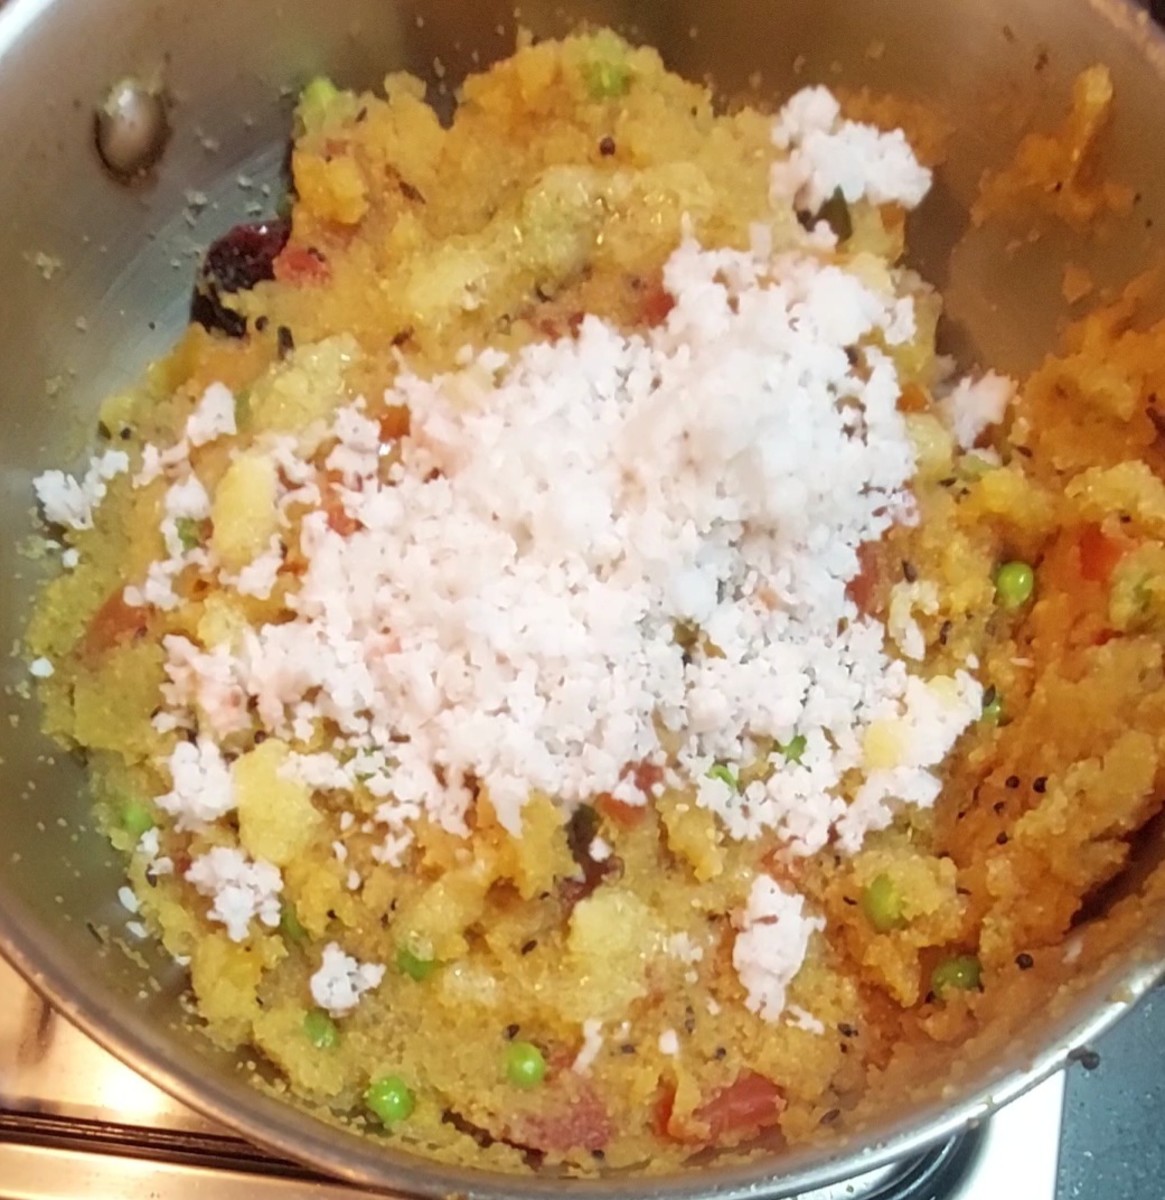 Add 1/2 cup grated coconut and 1 teaspoon ghee for extra flavor (optional).